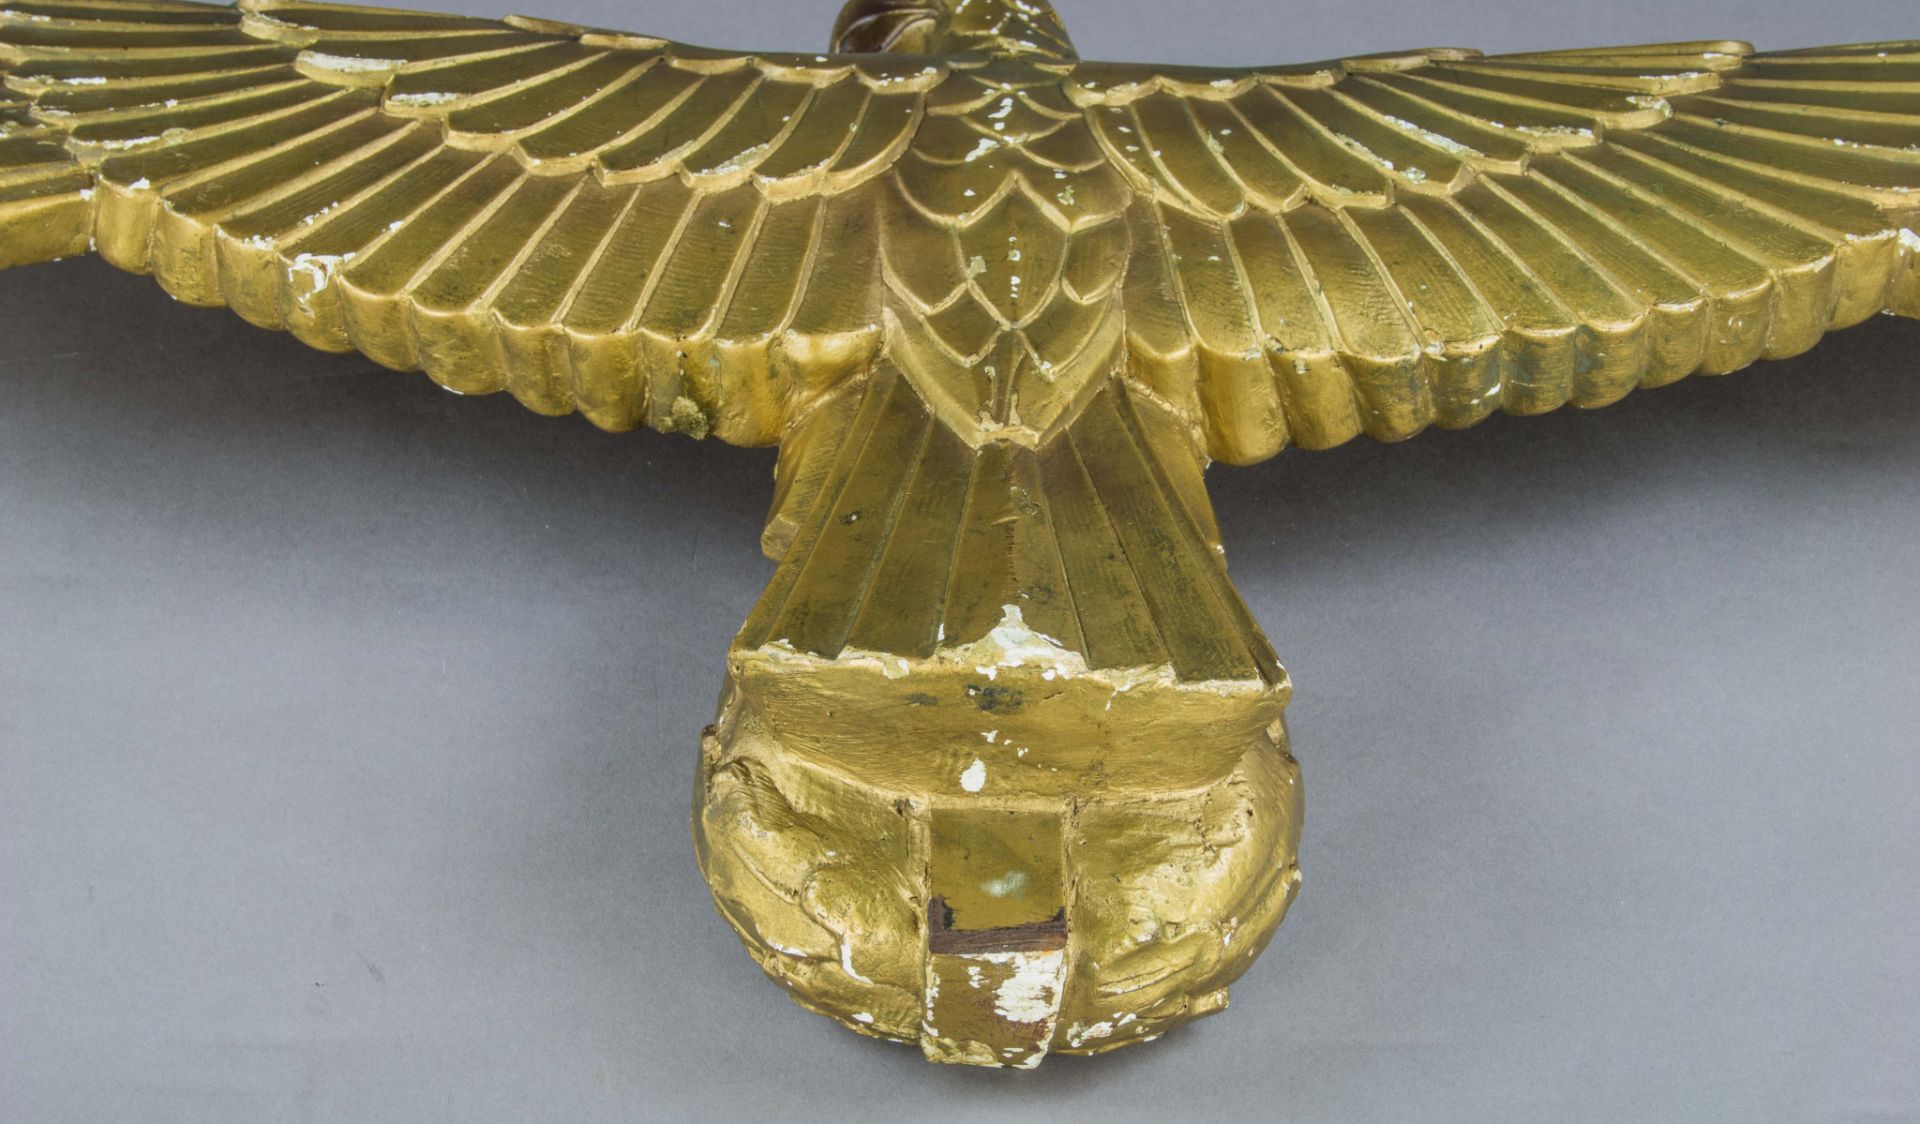 THE GOLDEN EAGLE FROM ADOLF HITLER'S REICHSCHANCELLERY BEDROOM - Image 8 of 13